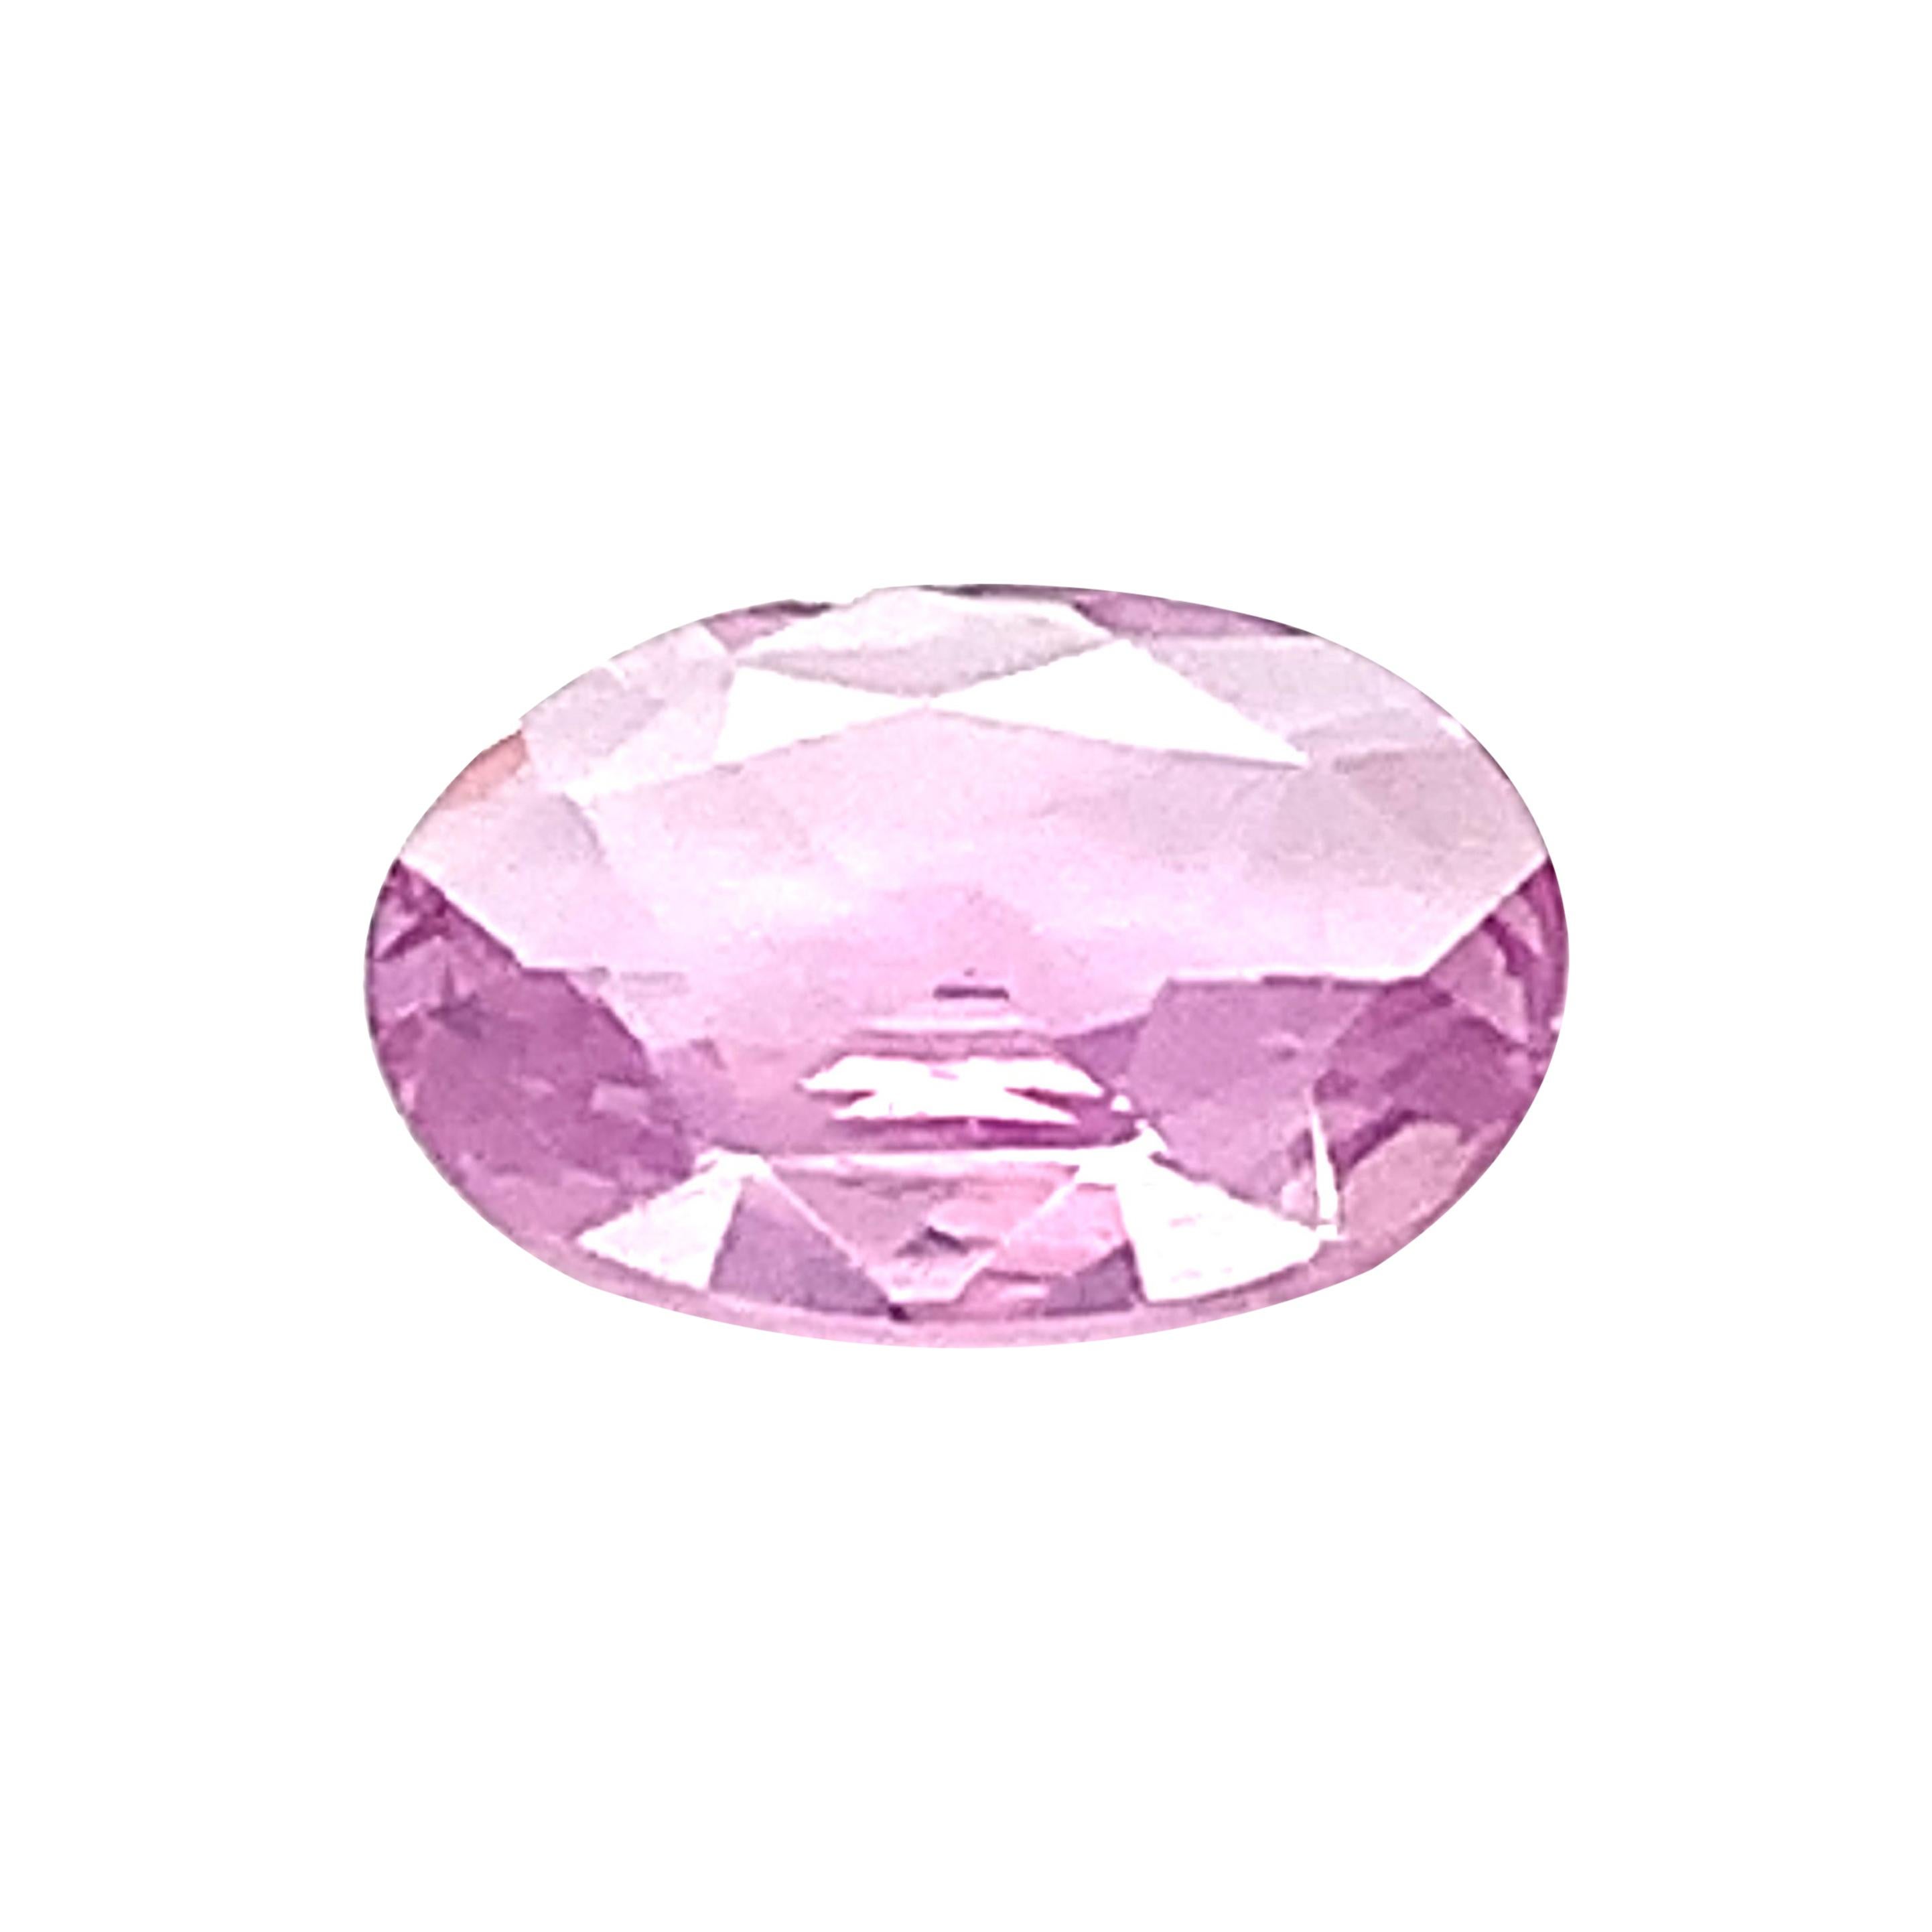 2.95 Ct. Pink Sapphire Oval GIA, Unset 3-Stone Engagement Ring or Pendant Gem